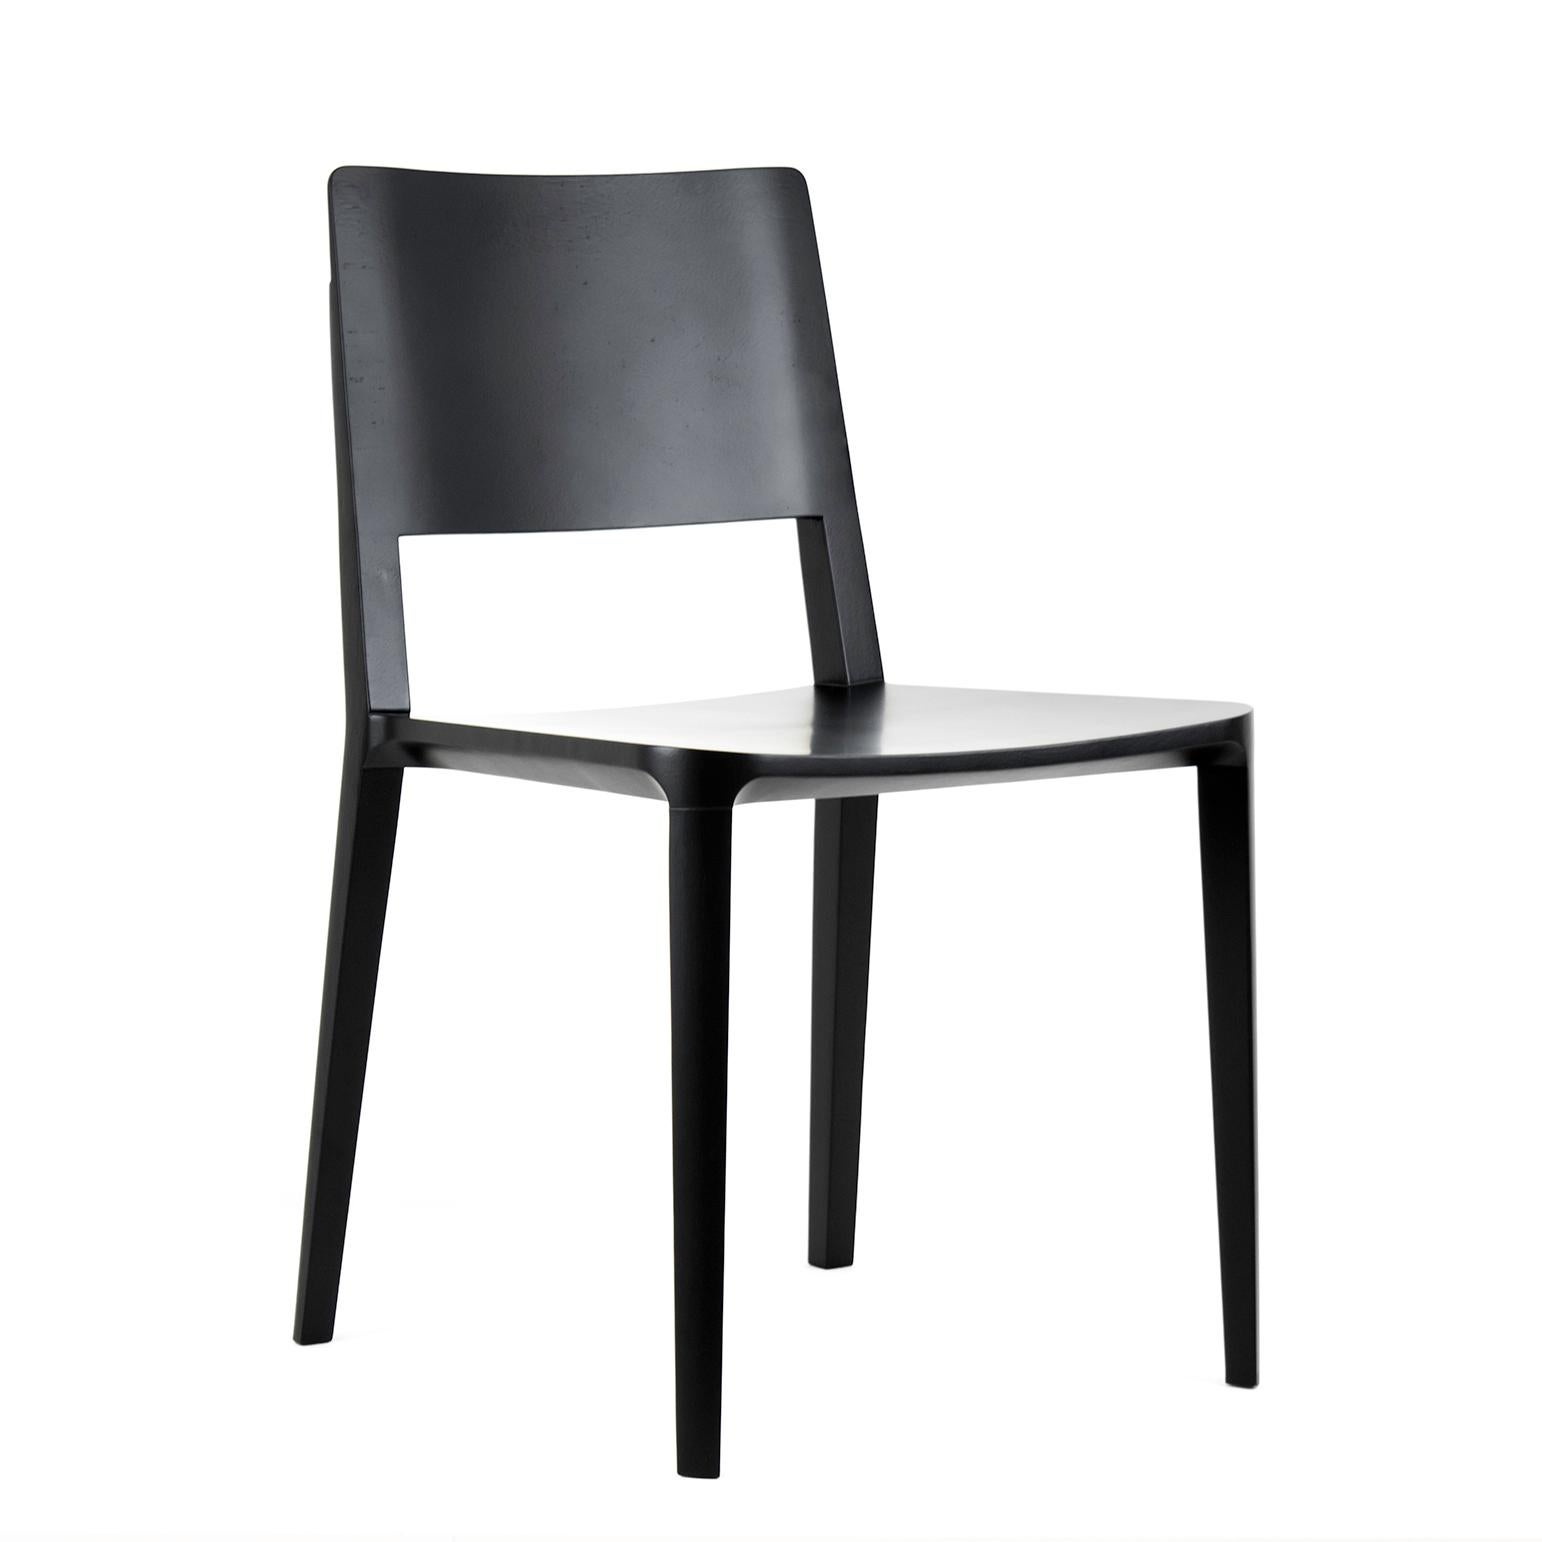 Minimalist Chair in Hardwood Solid Black For Sale